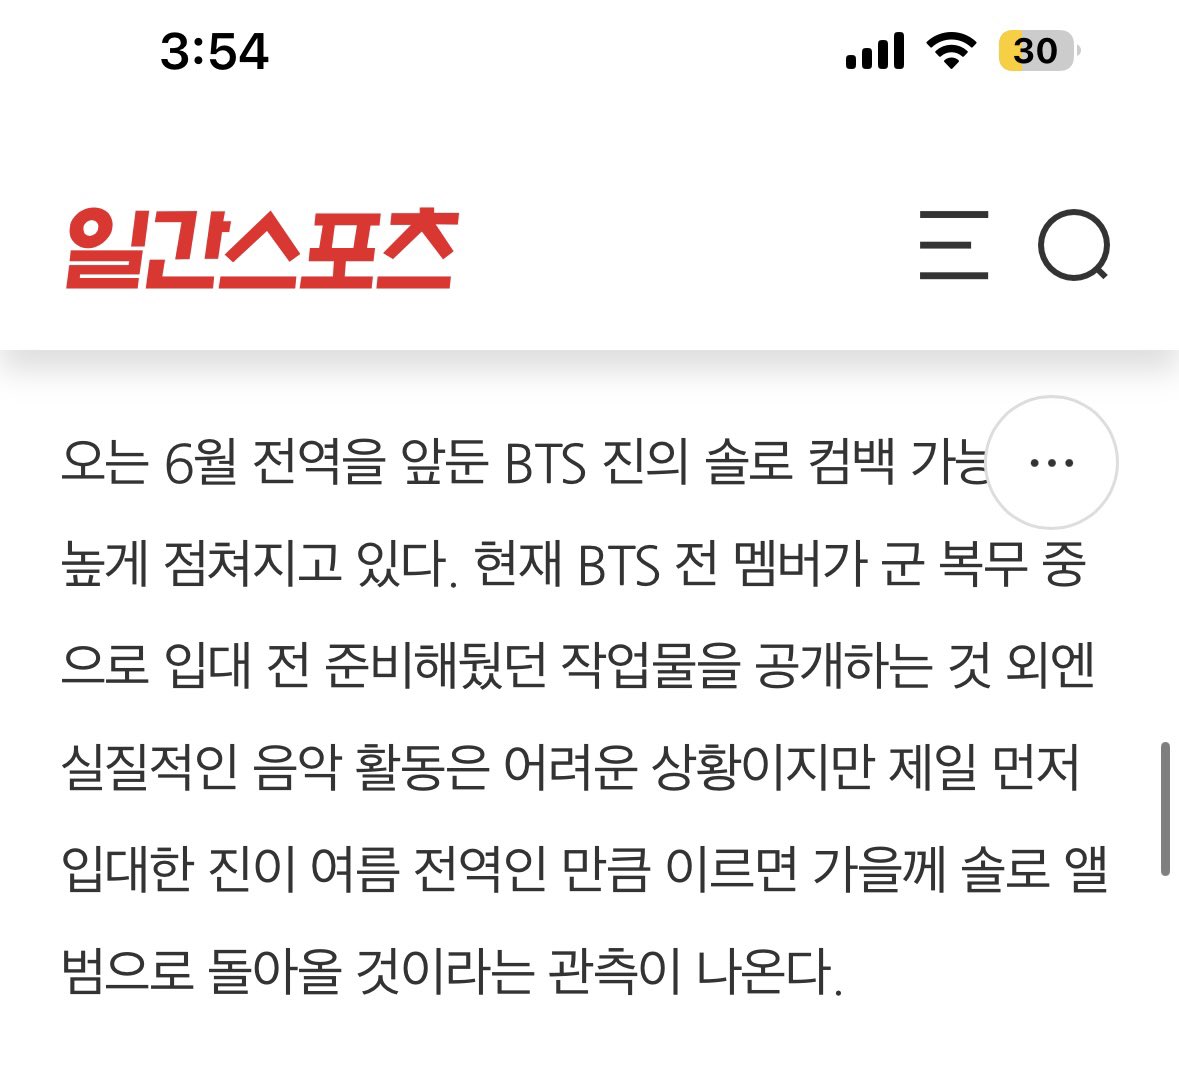 K-MEDIA REPORTS #JIN is one of the HOT STARS THAT WILL SHAKE UP THE K MUSIC INDUSTRY THIS YEAR “ Hot solo stars that will shake up the K music industry” BTS JIN “BTS Jin, who is about to be discharged from the military in June, is highly likely to make a solo comeback.…